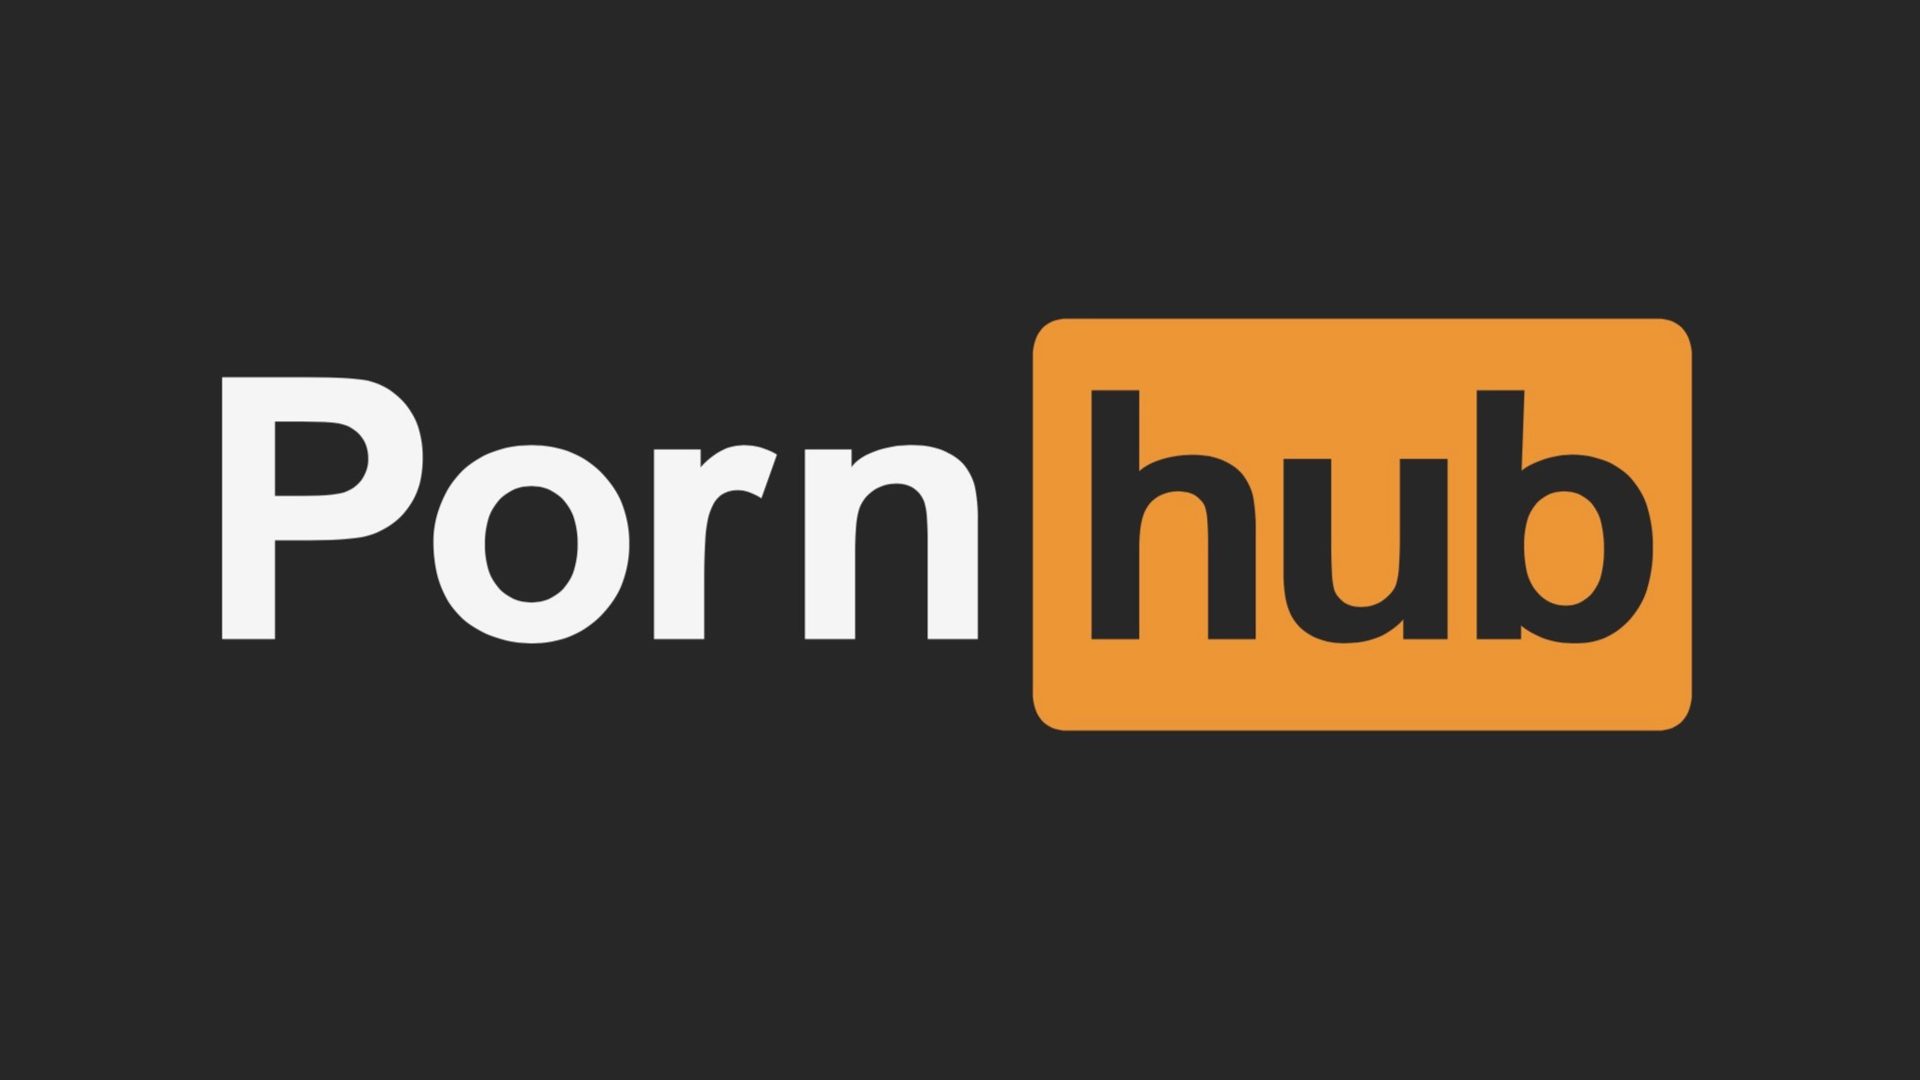 Free Download From Pornhub hump bus